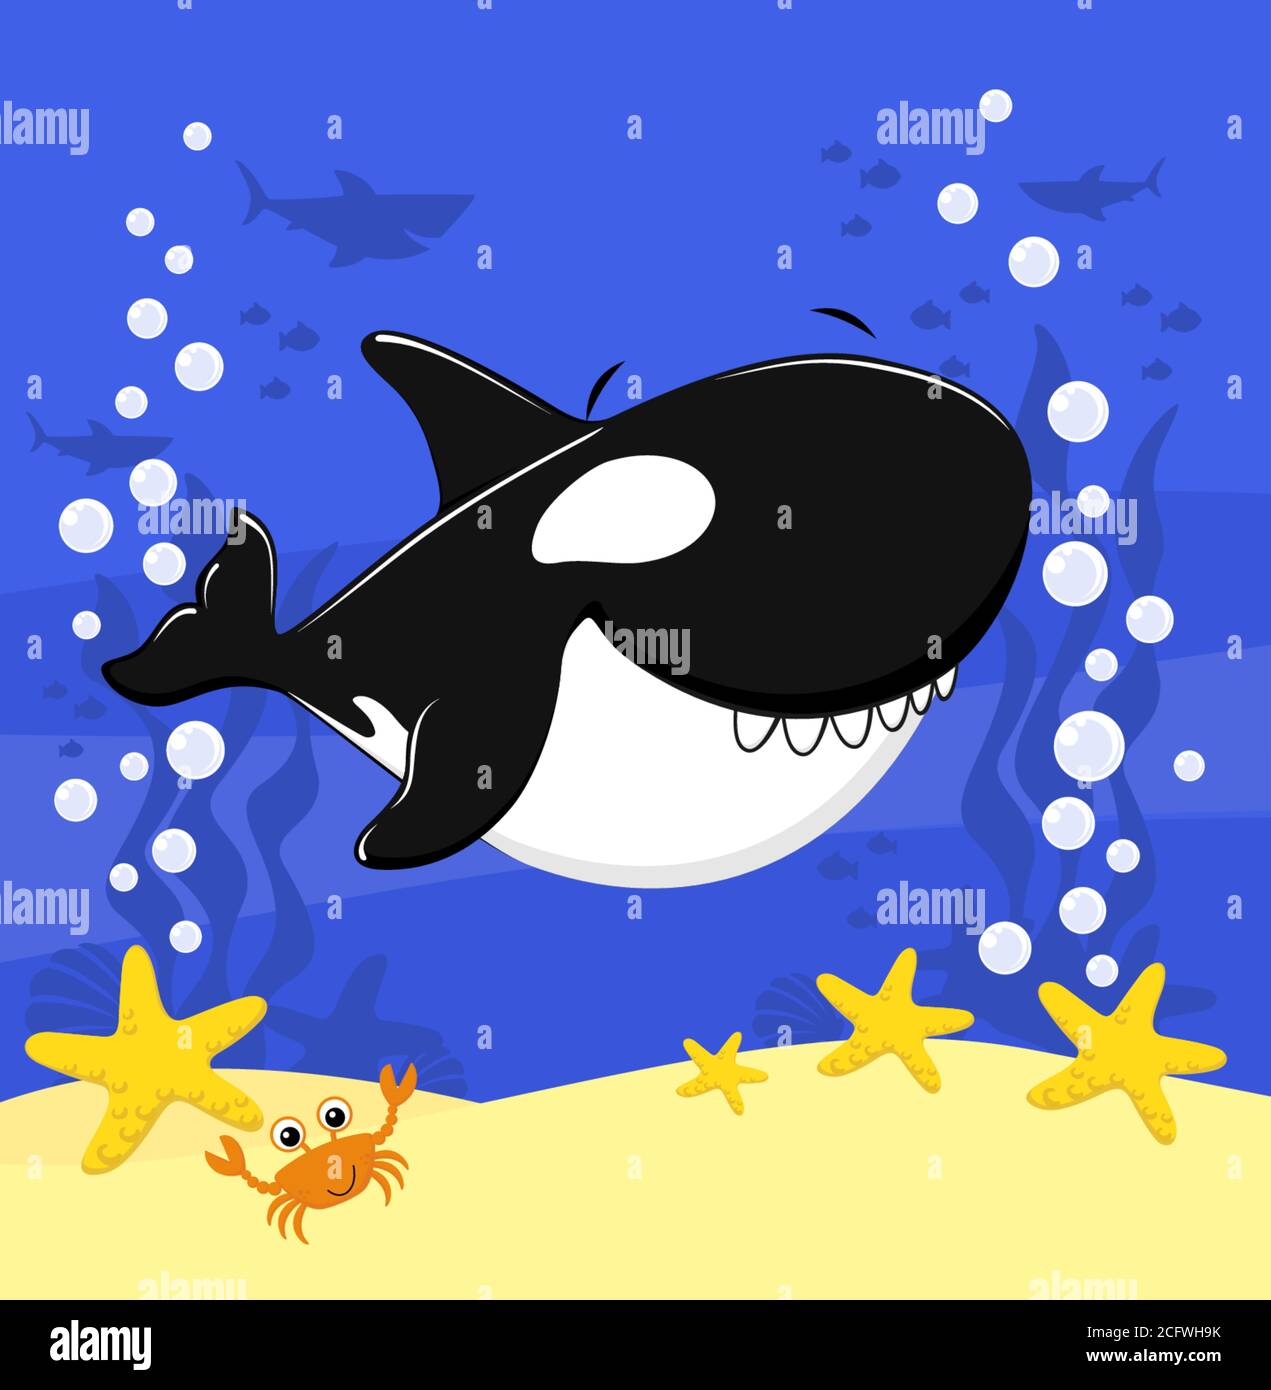 Cute baby killer whale cartoon illustration with bubbles and under the sea background design for baby and child stock vector image art